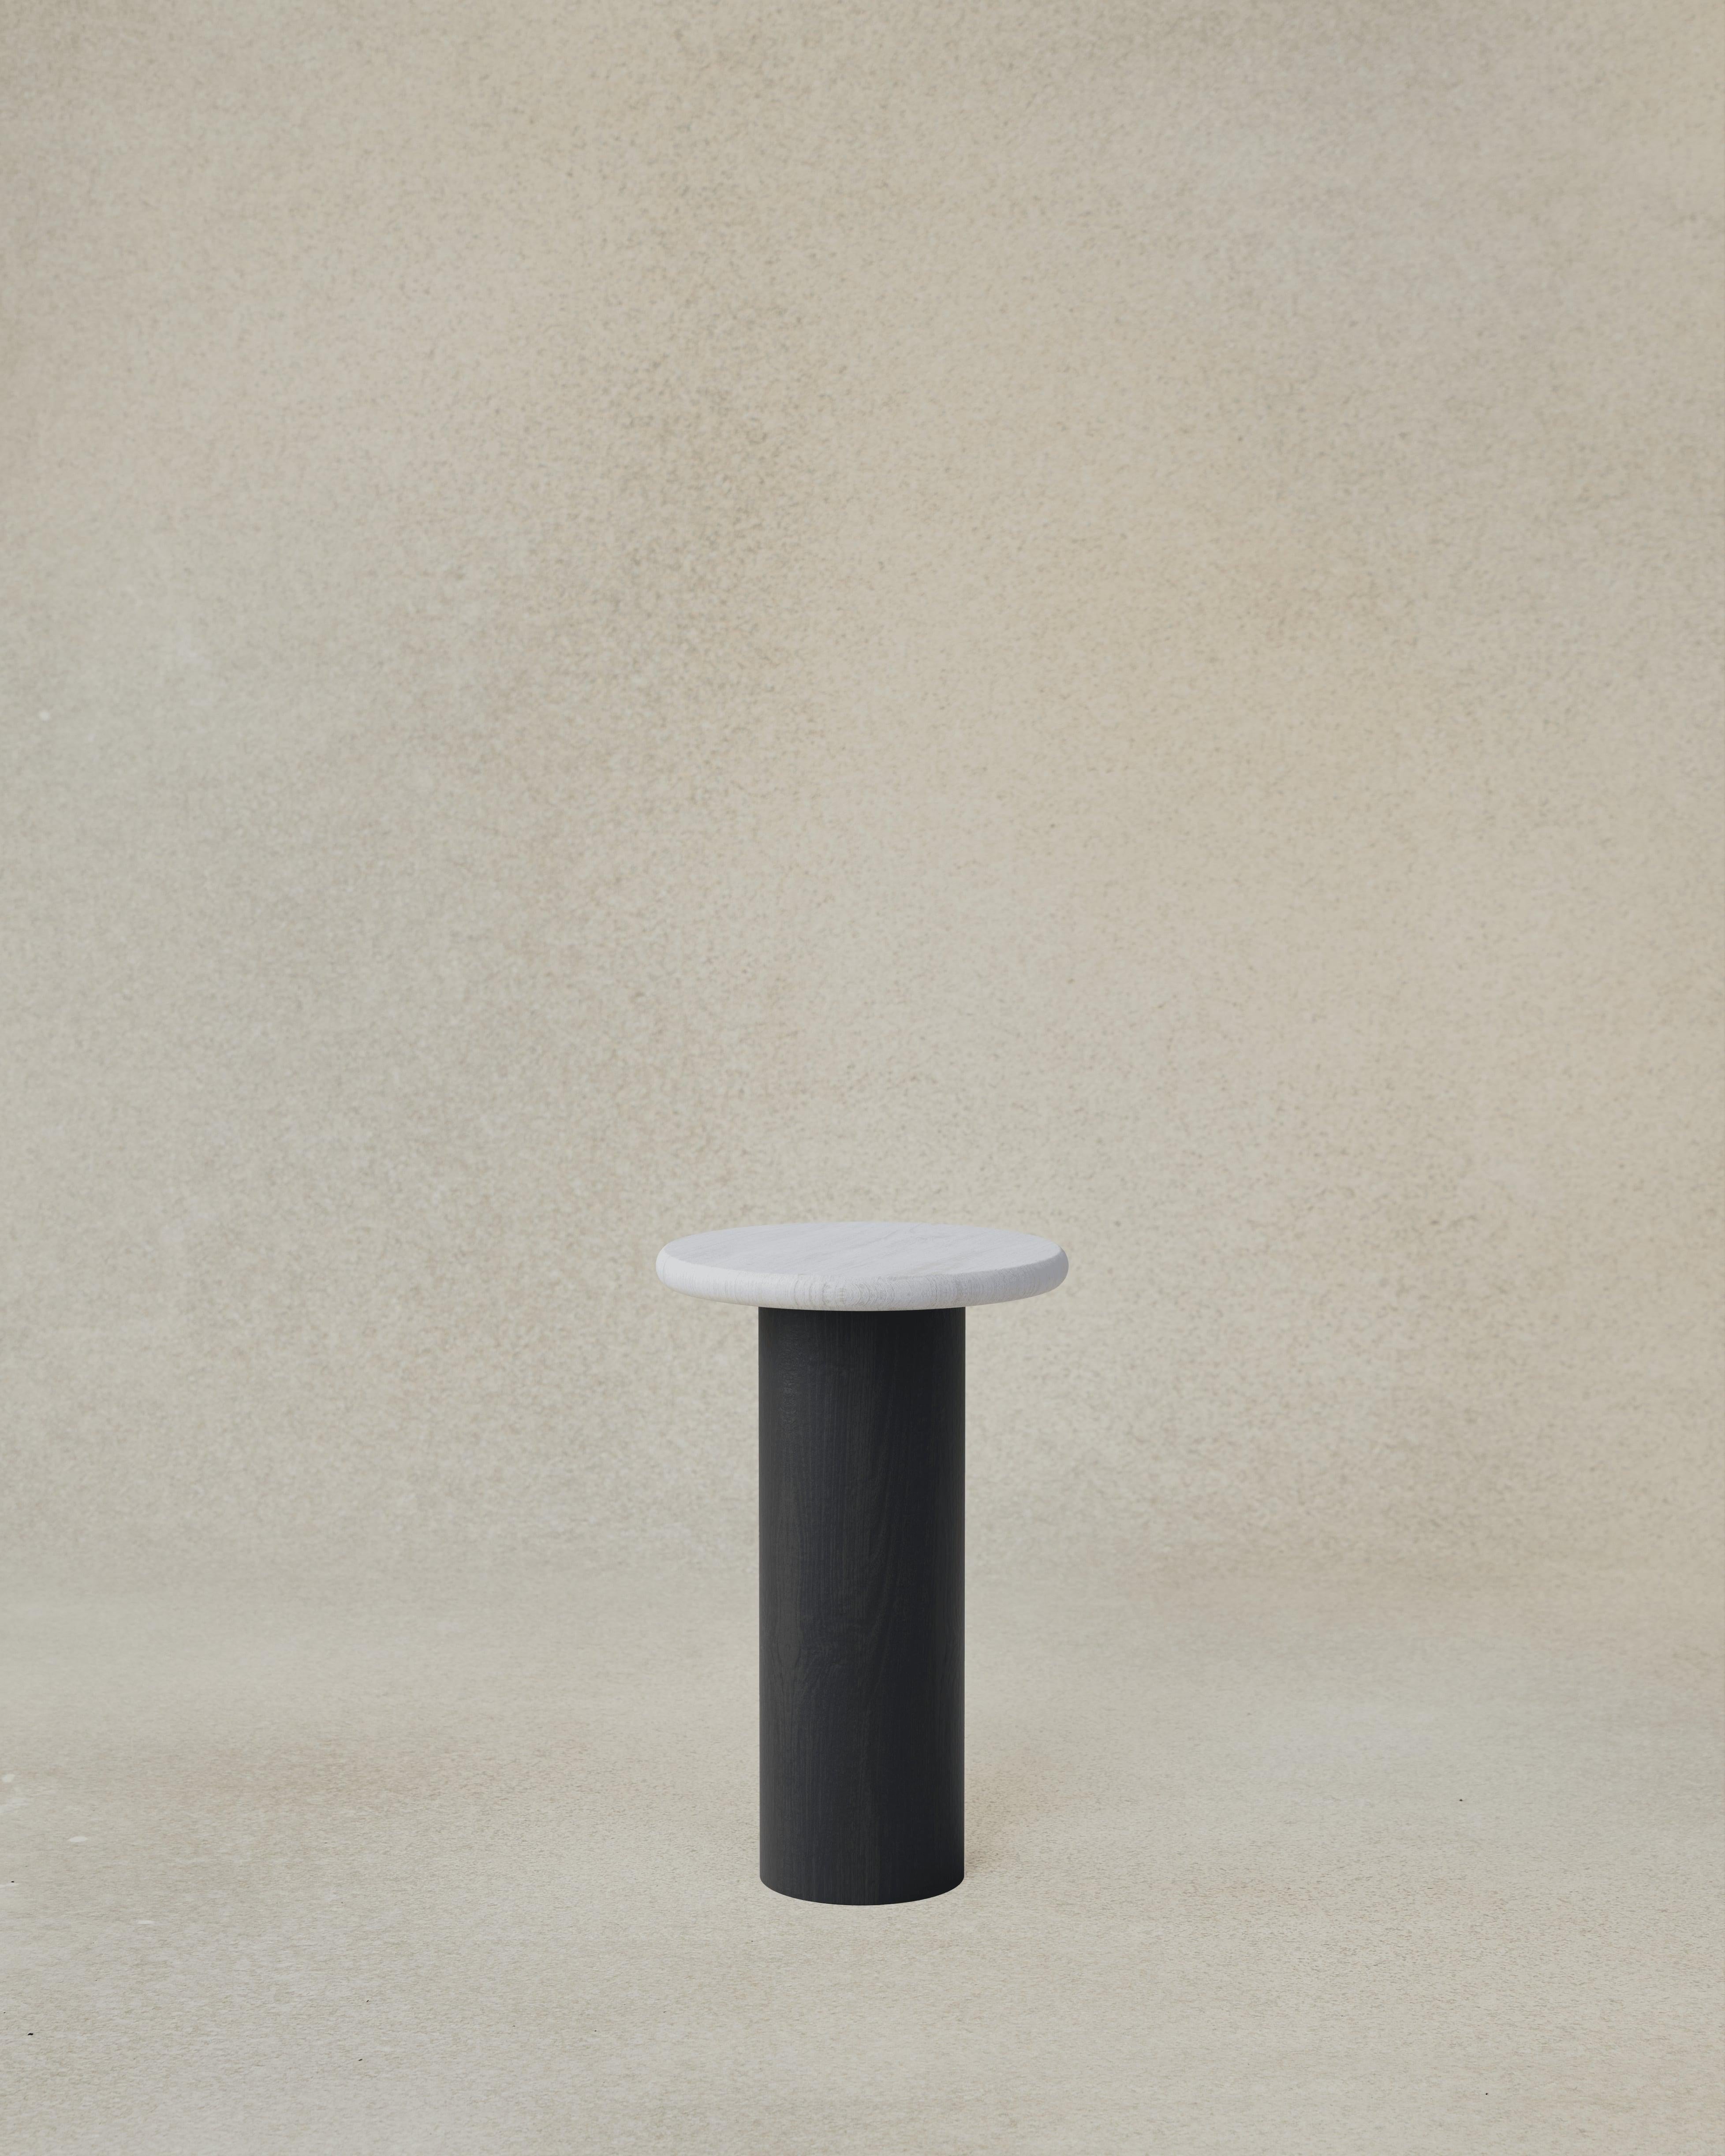 The Raindrop 300 is the smallest and tallest Raindrop we offer in the series, designed to be a side table or bedside table for your home and now available in a range of finishes to suit any interior or style. The raindrops nestle together to form a